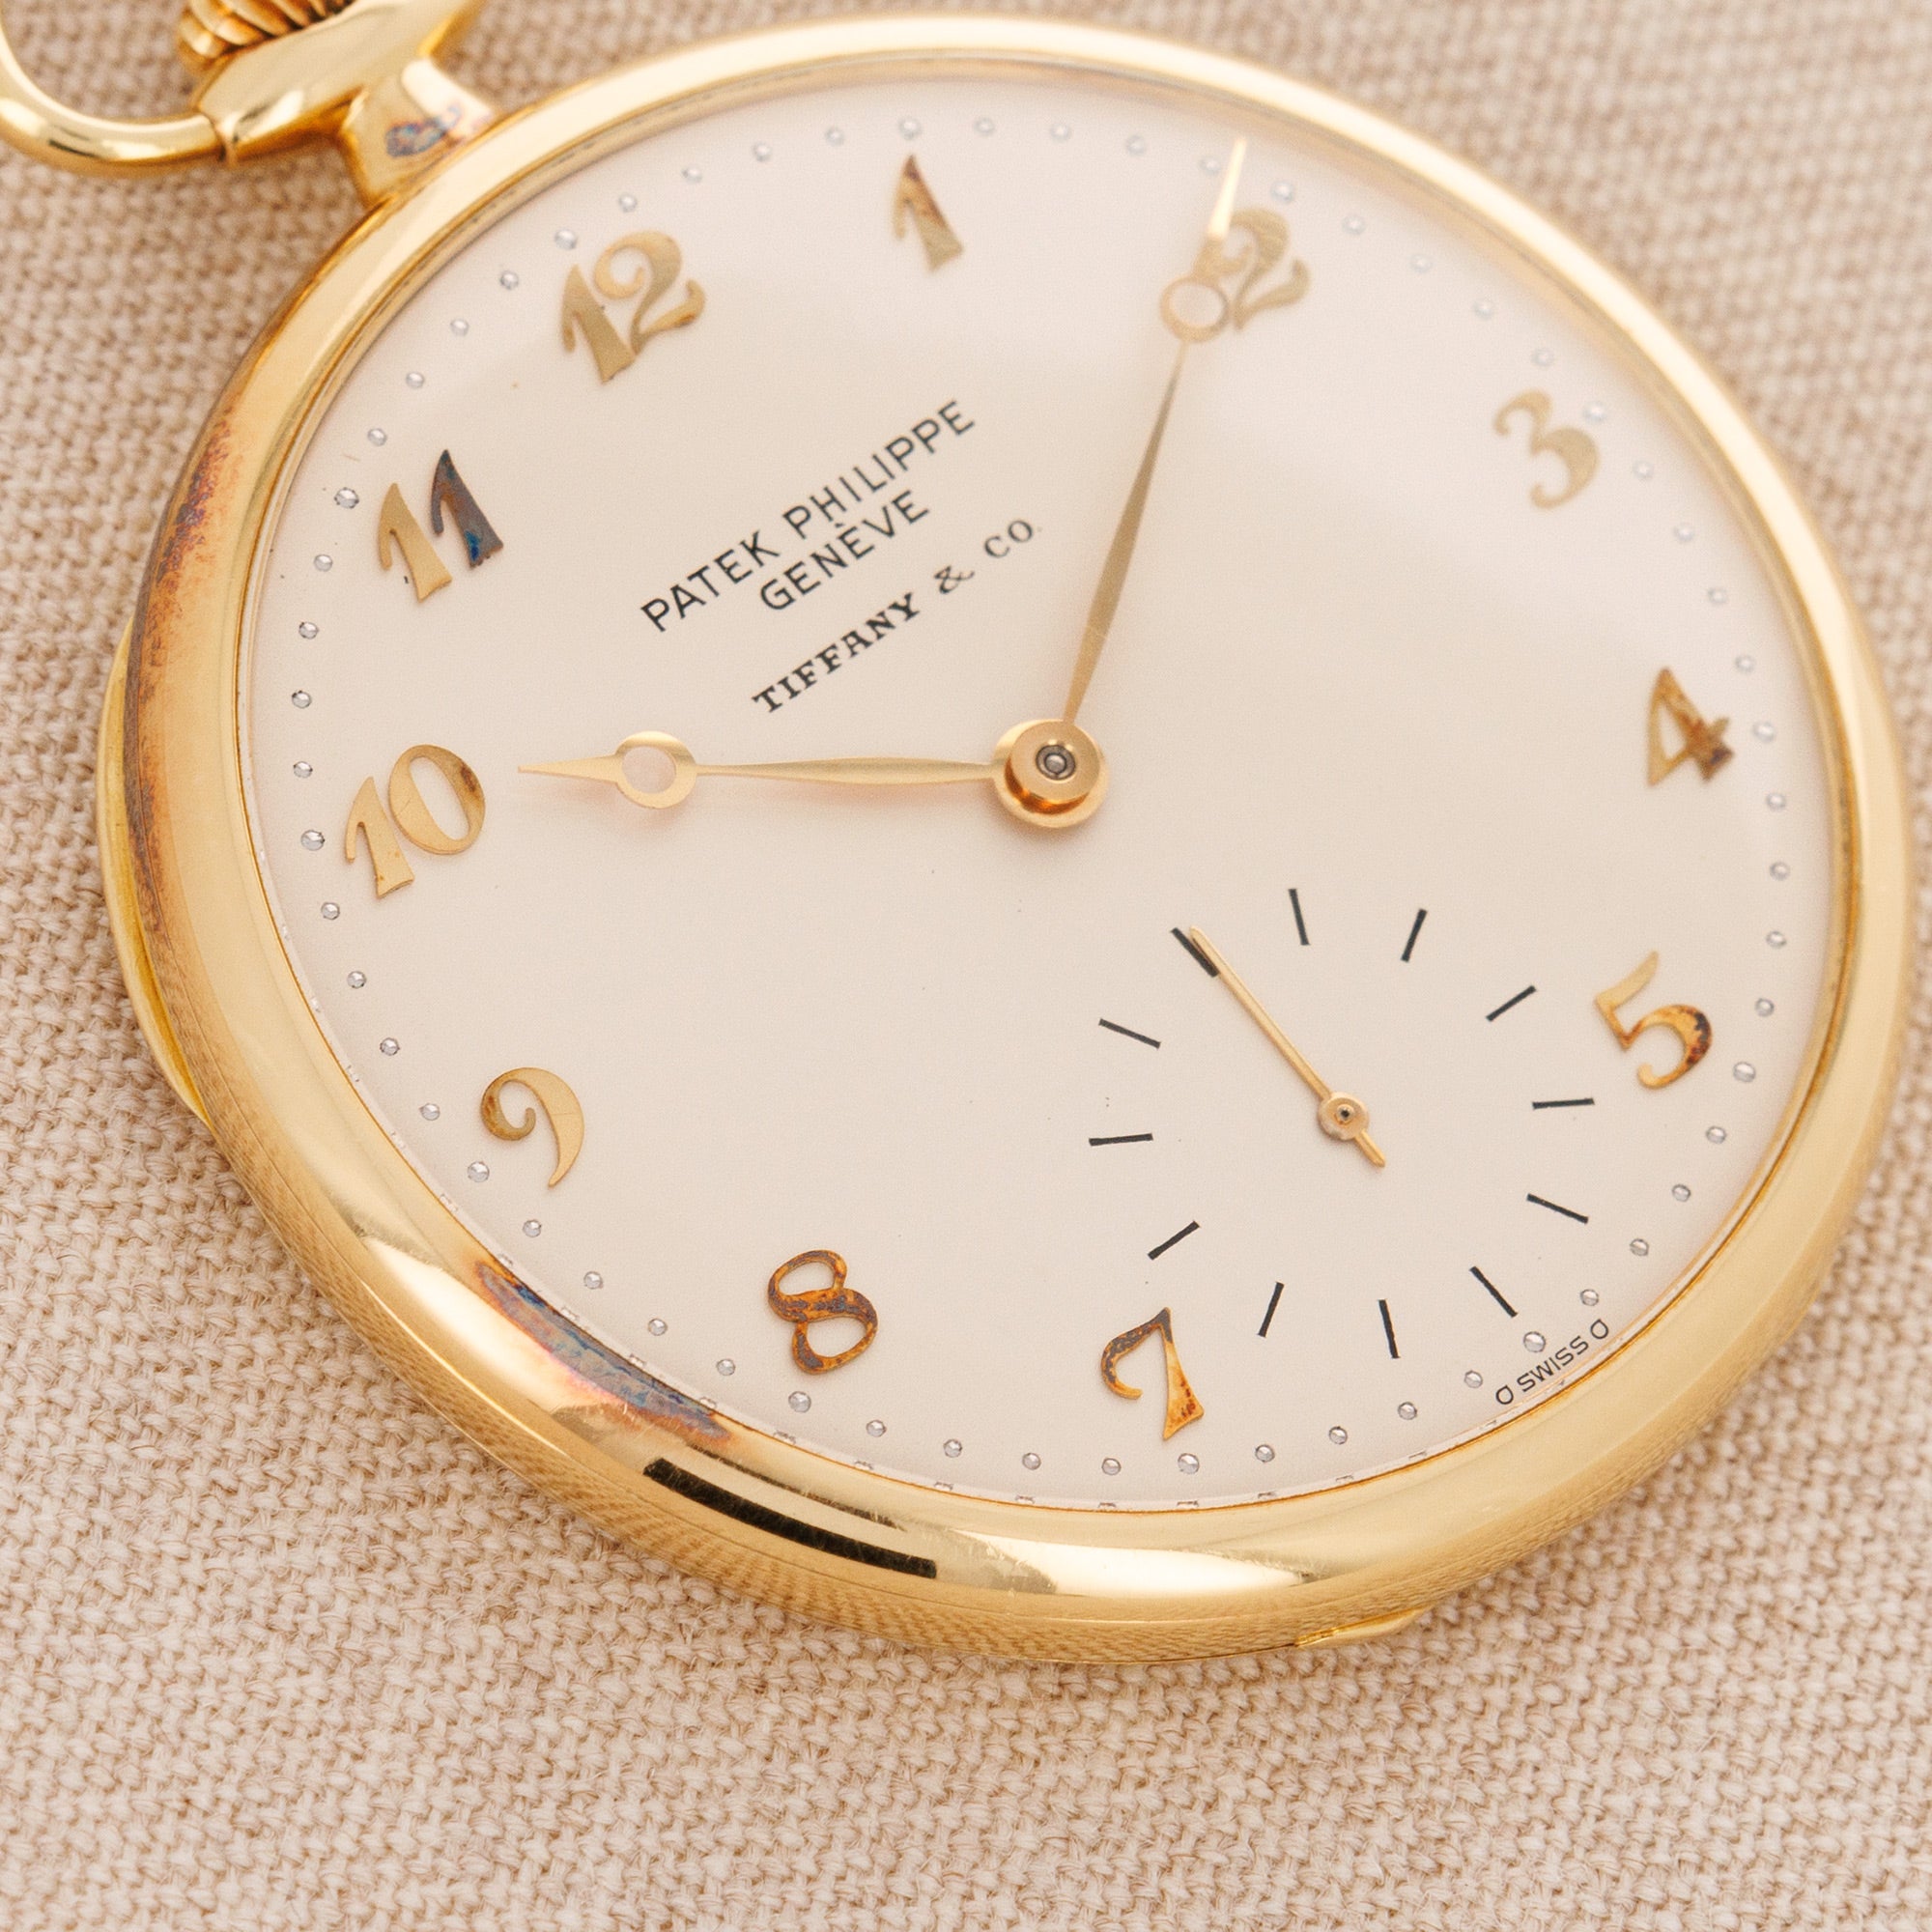 Patek Philippe Yellow Gold Pocket Watch Ref. 652 with Breguet Numerals Retailed by Tiffany &amp; Co. Ref. 652/1